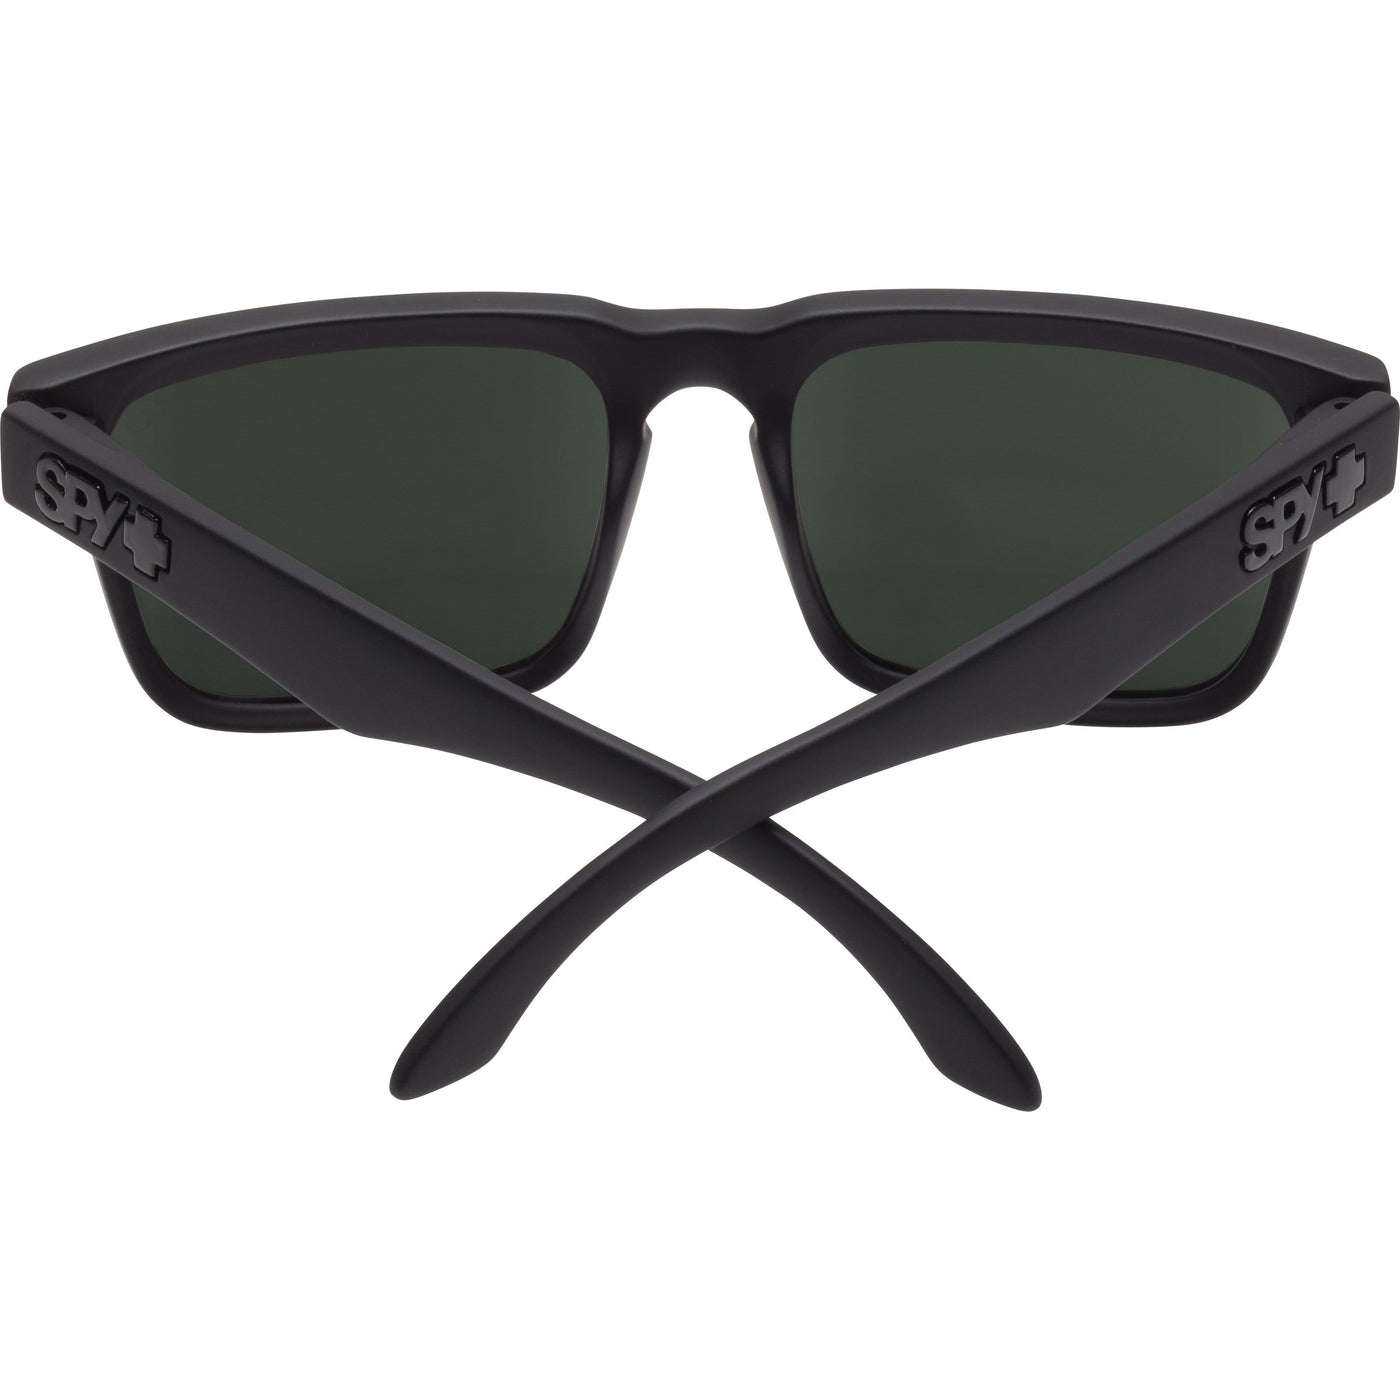 SPY HELM Sunglasses, Happy Lens - Gray/Green 8Lines Shop - Fast Shipping